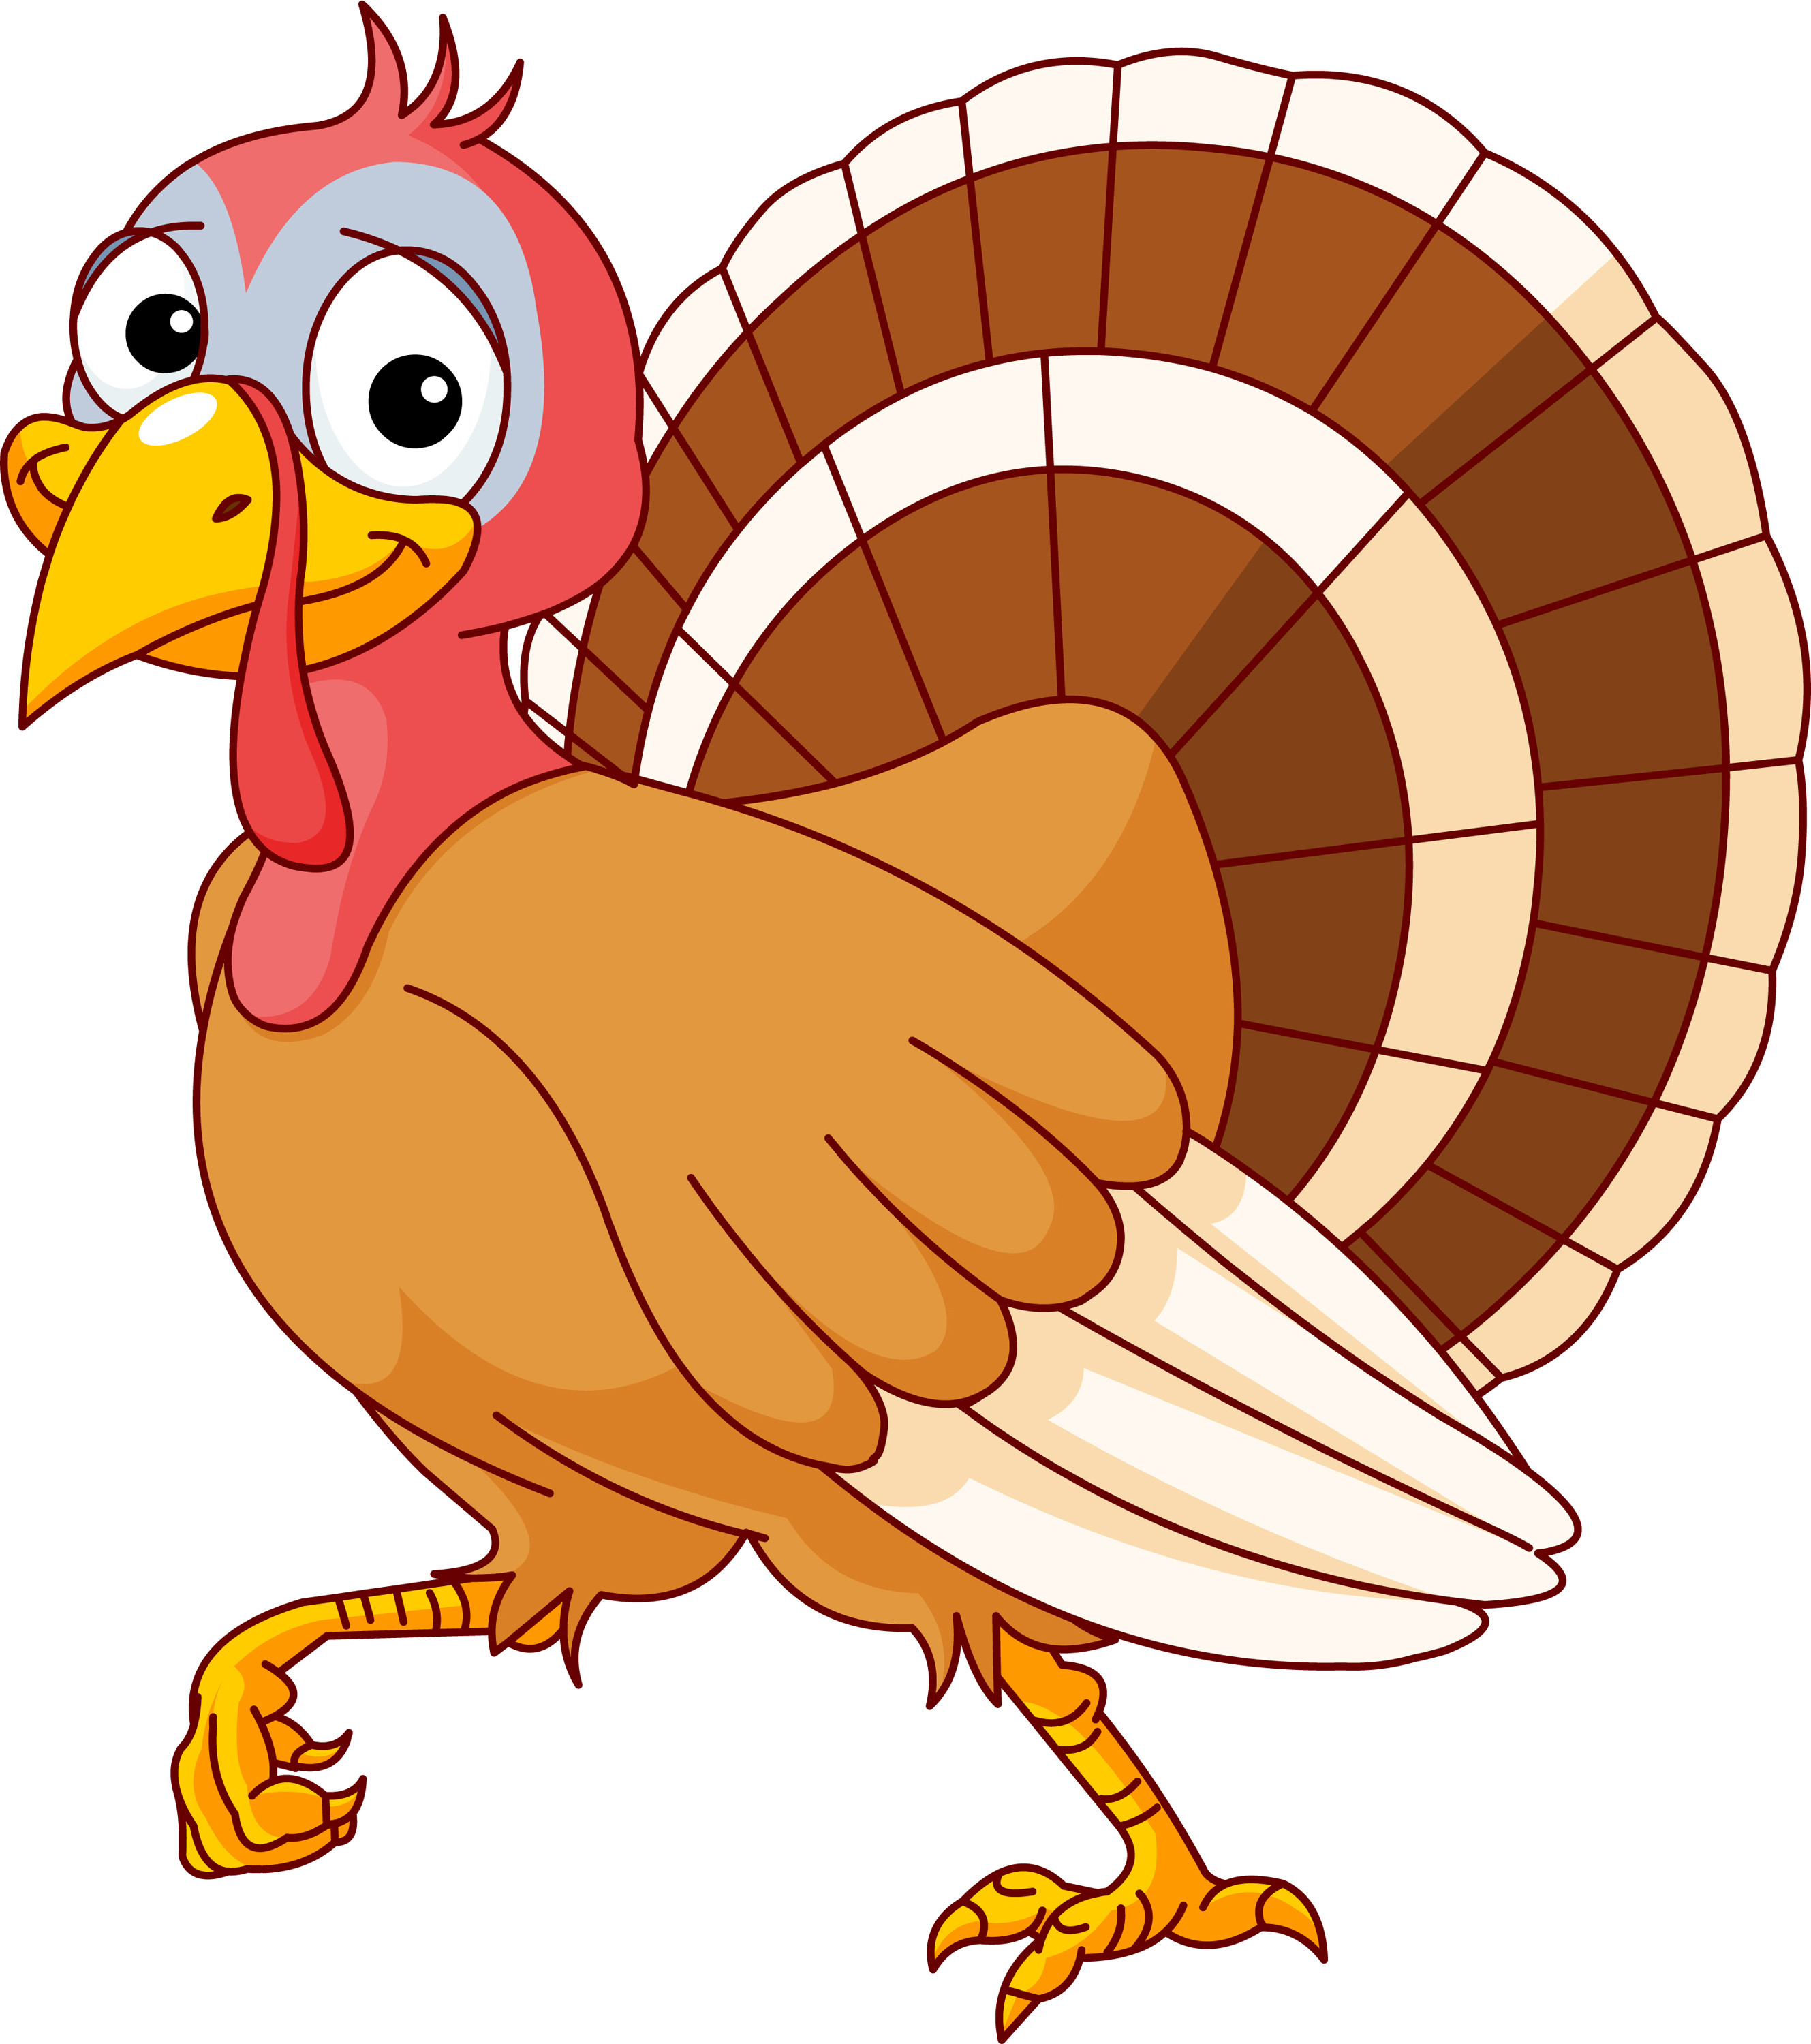 Images Of Thanksgiving Turkey
 Day 6 Write a letter as a turkey convincing people to